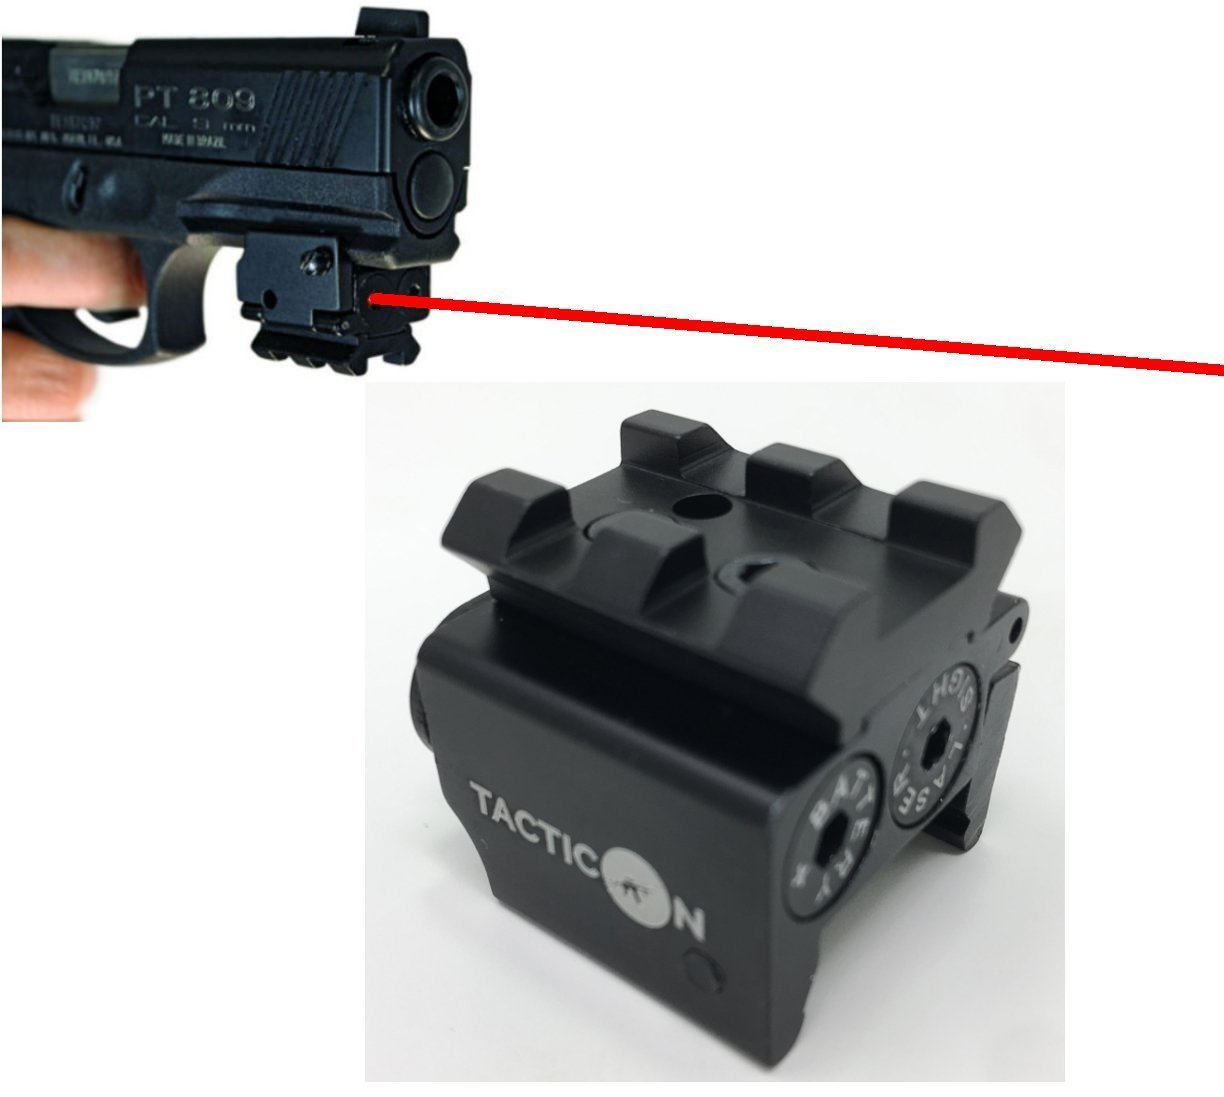 Grab a laser sight for your next airsoft adventure.<br><br>Aim your browser <a href="https://amzn.to/2RihEyf" target="_blank" "nofollow">here</a> and buy one online.